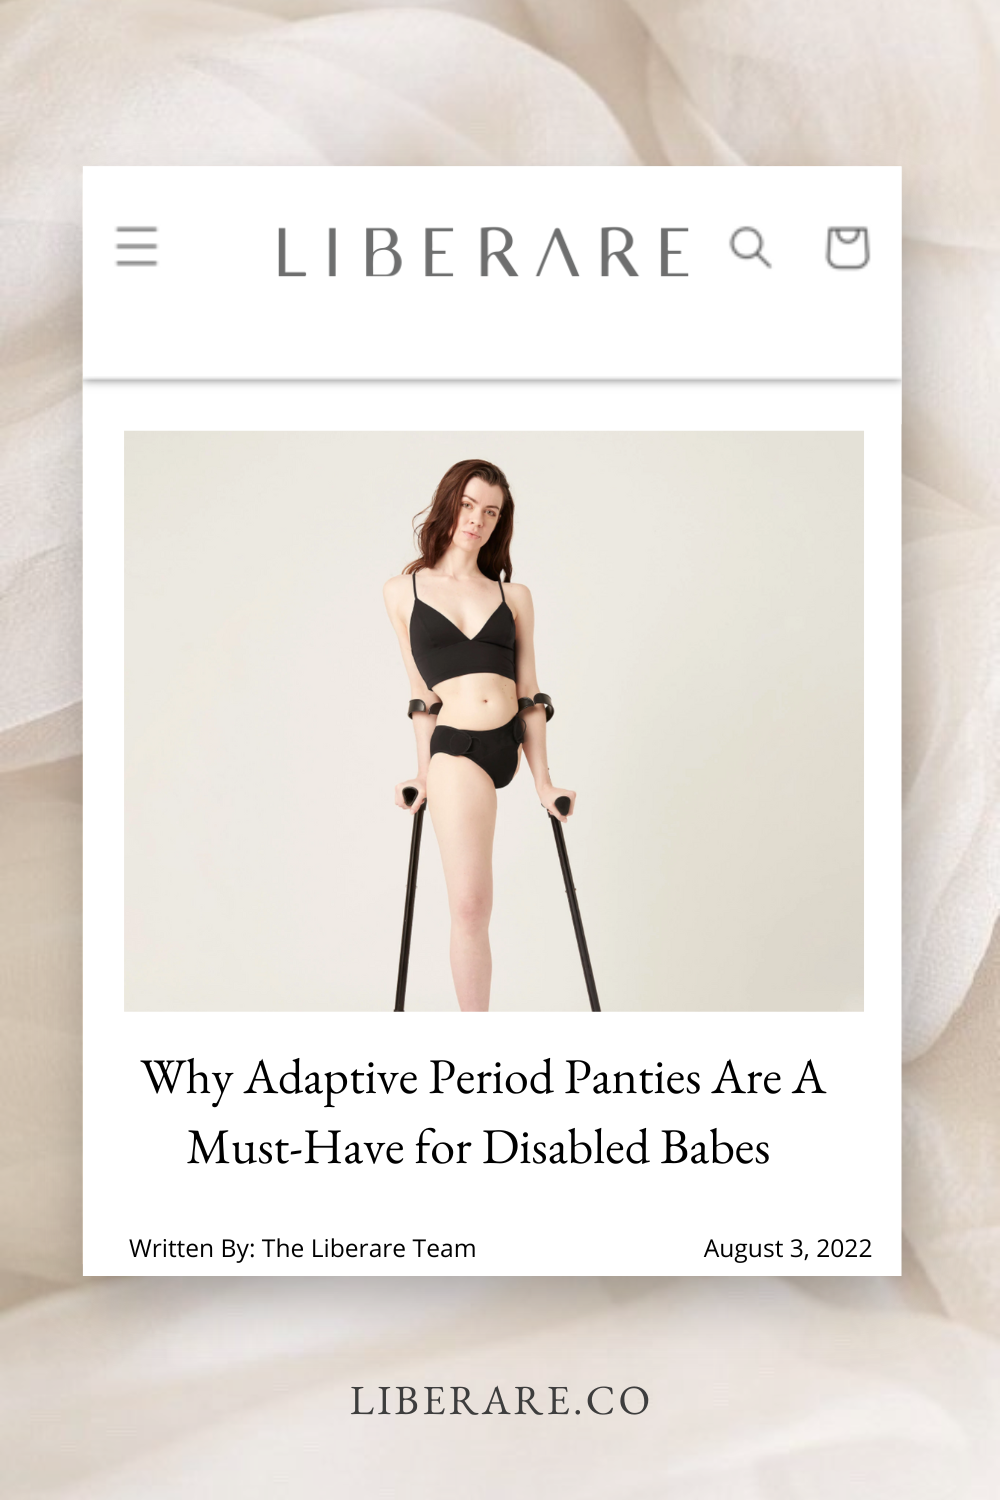 A woman with crutches and is an amputee is wearing a black bra and underwear. The text reads Why Adaptive Period Panties Are A Must-Have for Disabled Babes